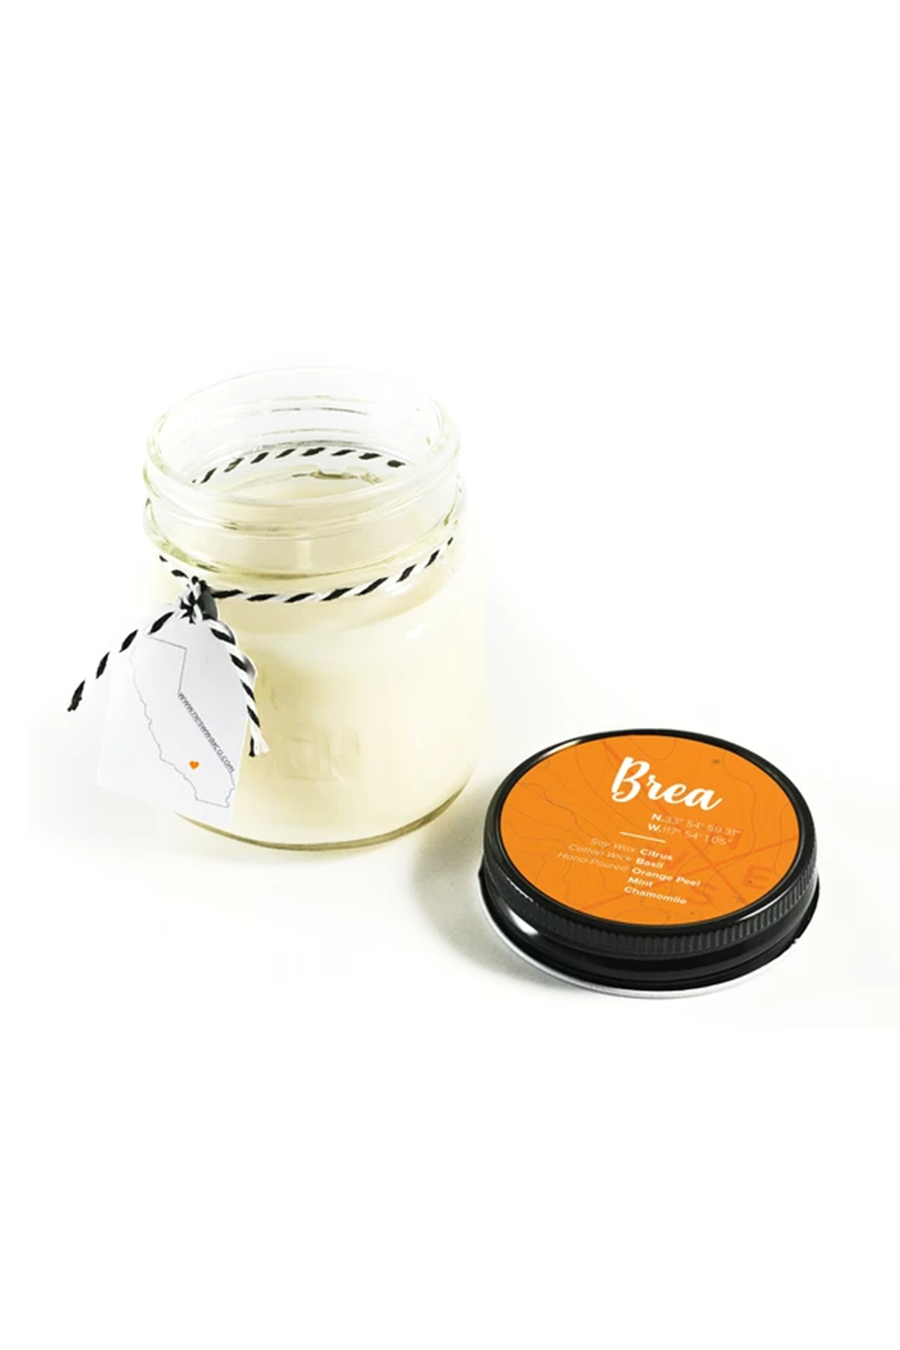 Brea Soy Candle - Main Image Number 1 of 1